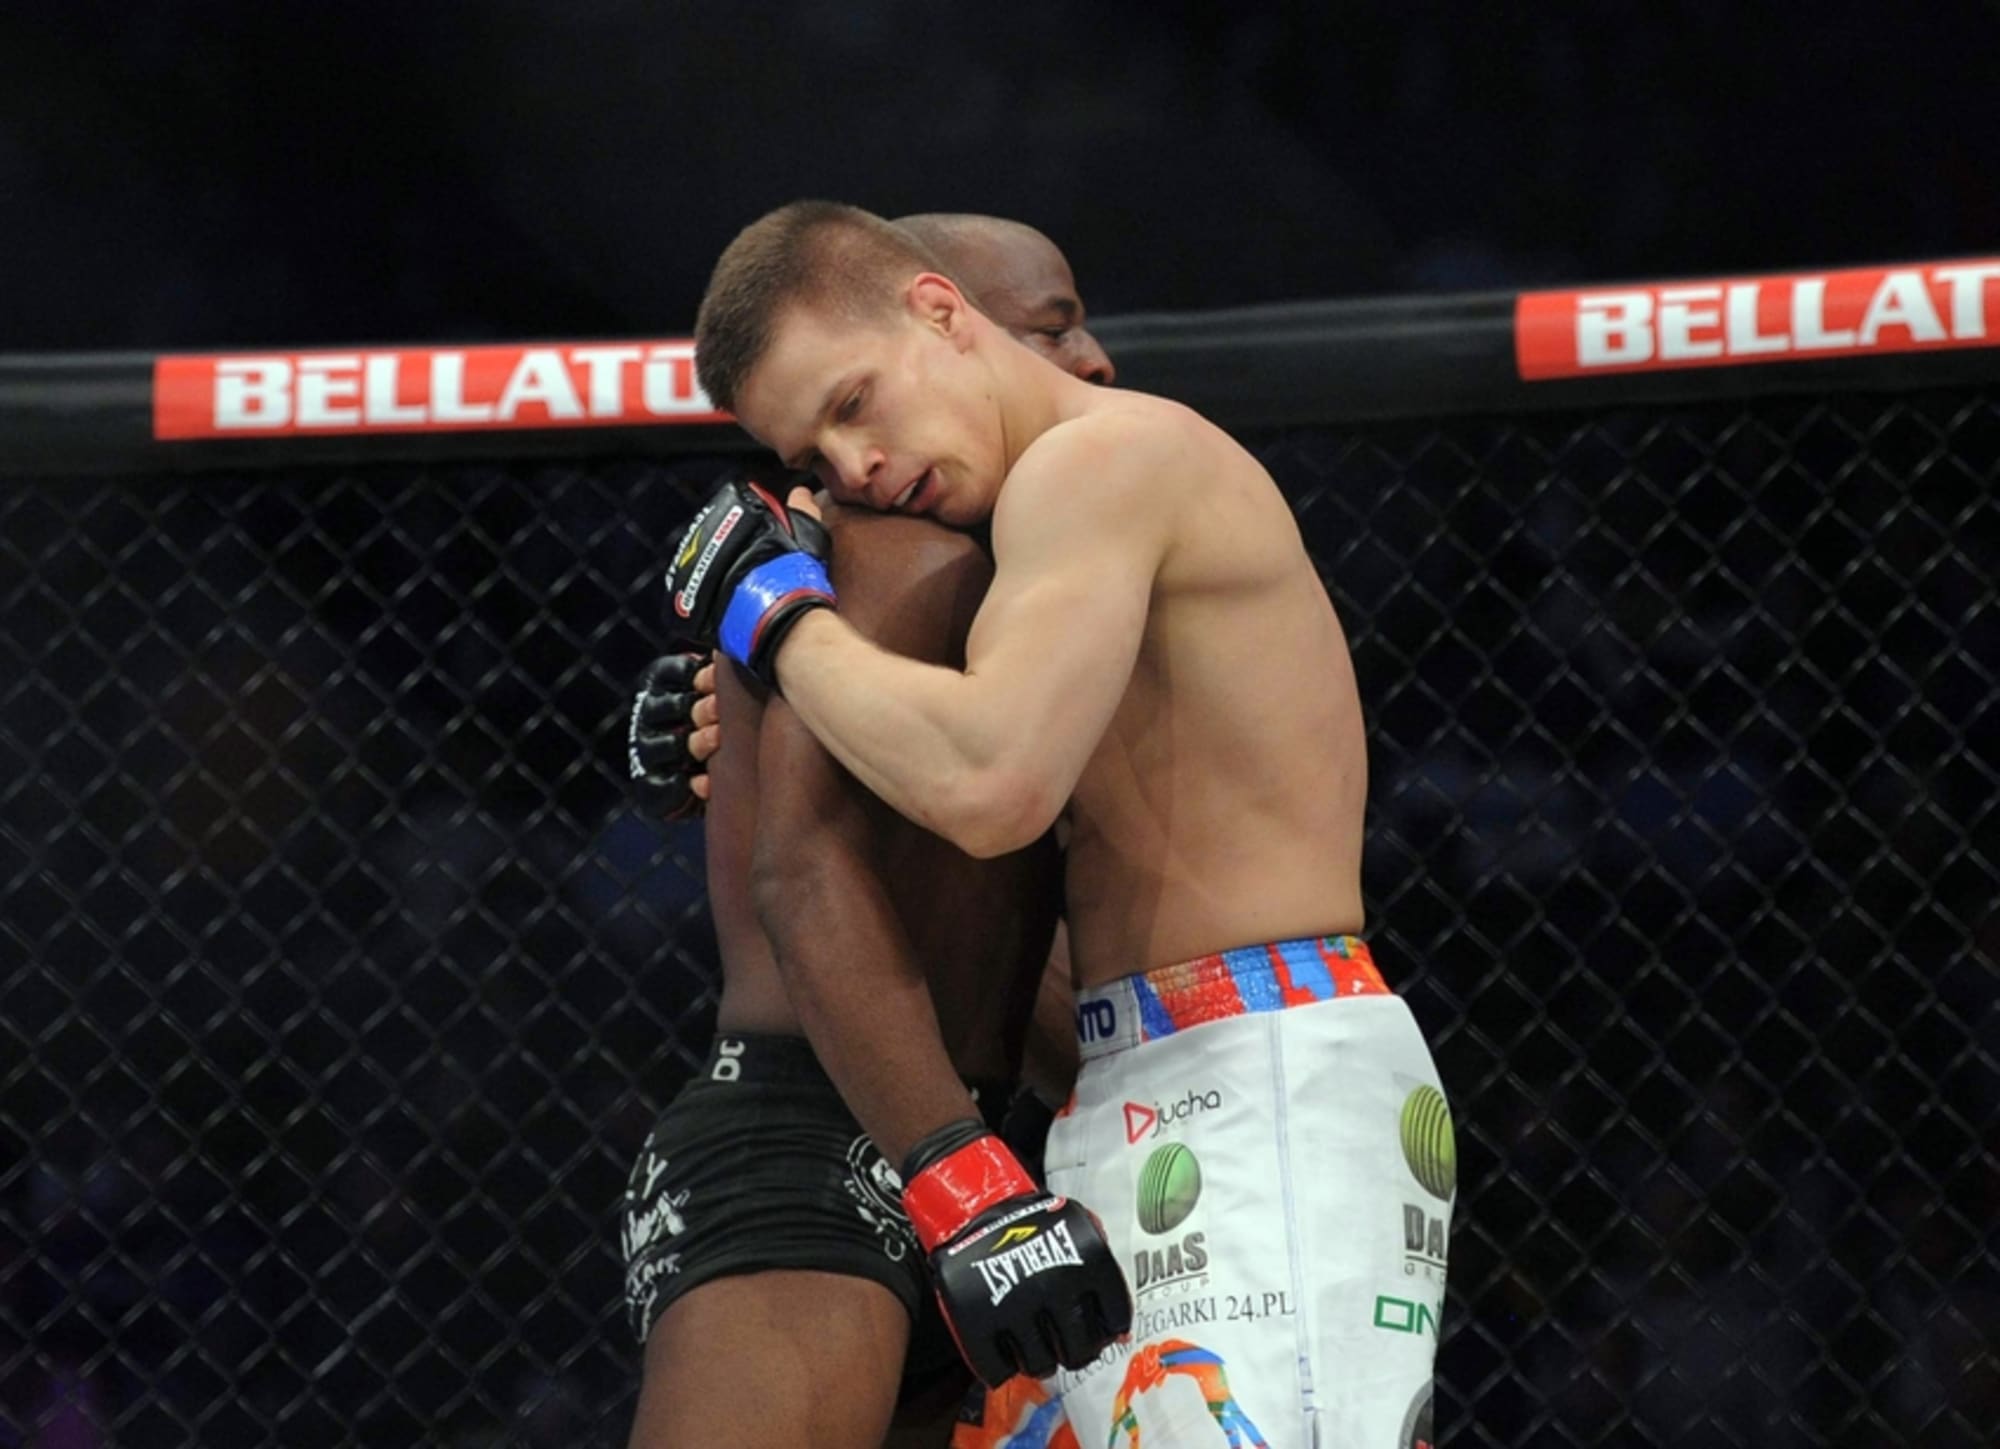 Bellator: Marcin Held "Will Brooks is Tough, But I'm Ready"